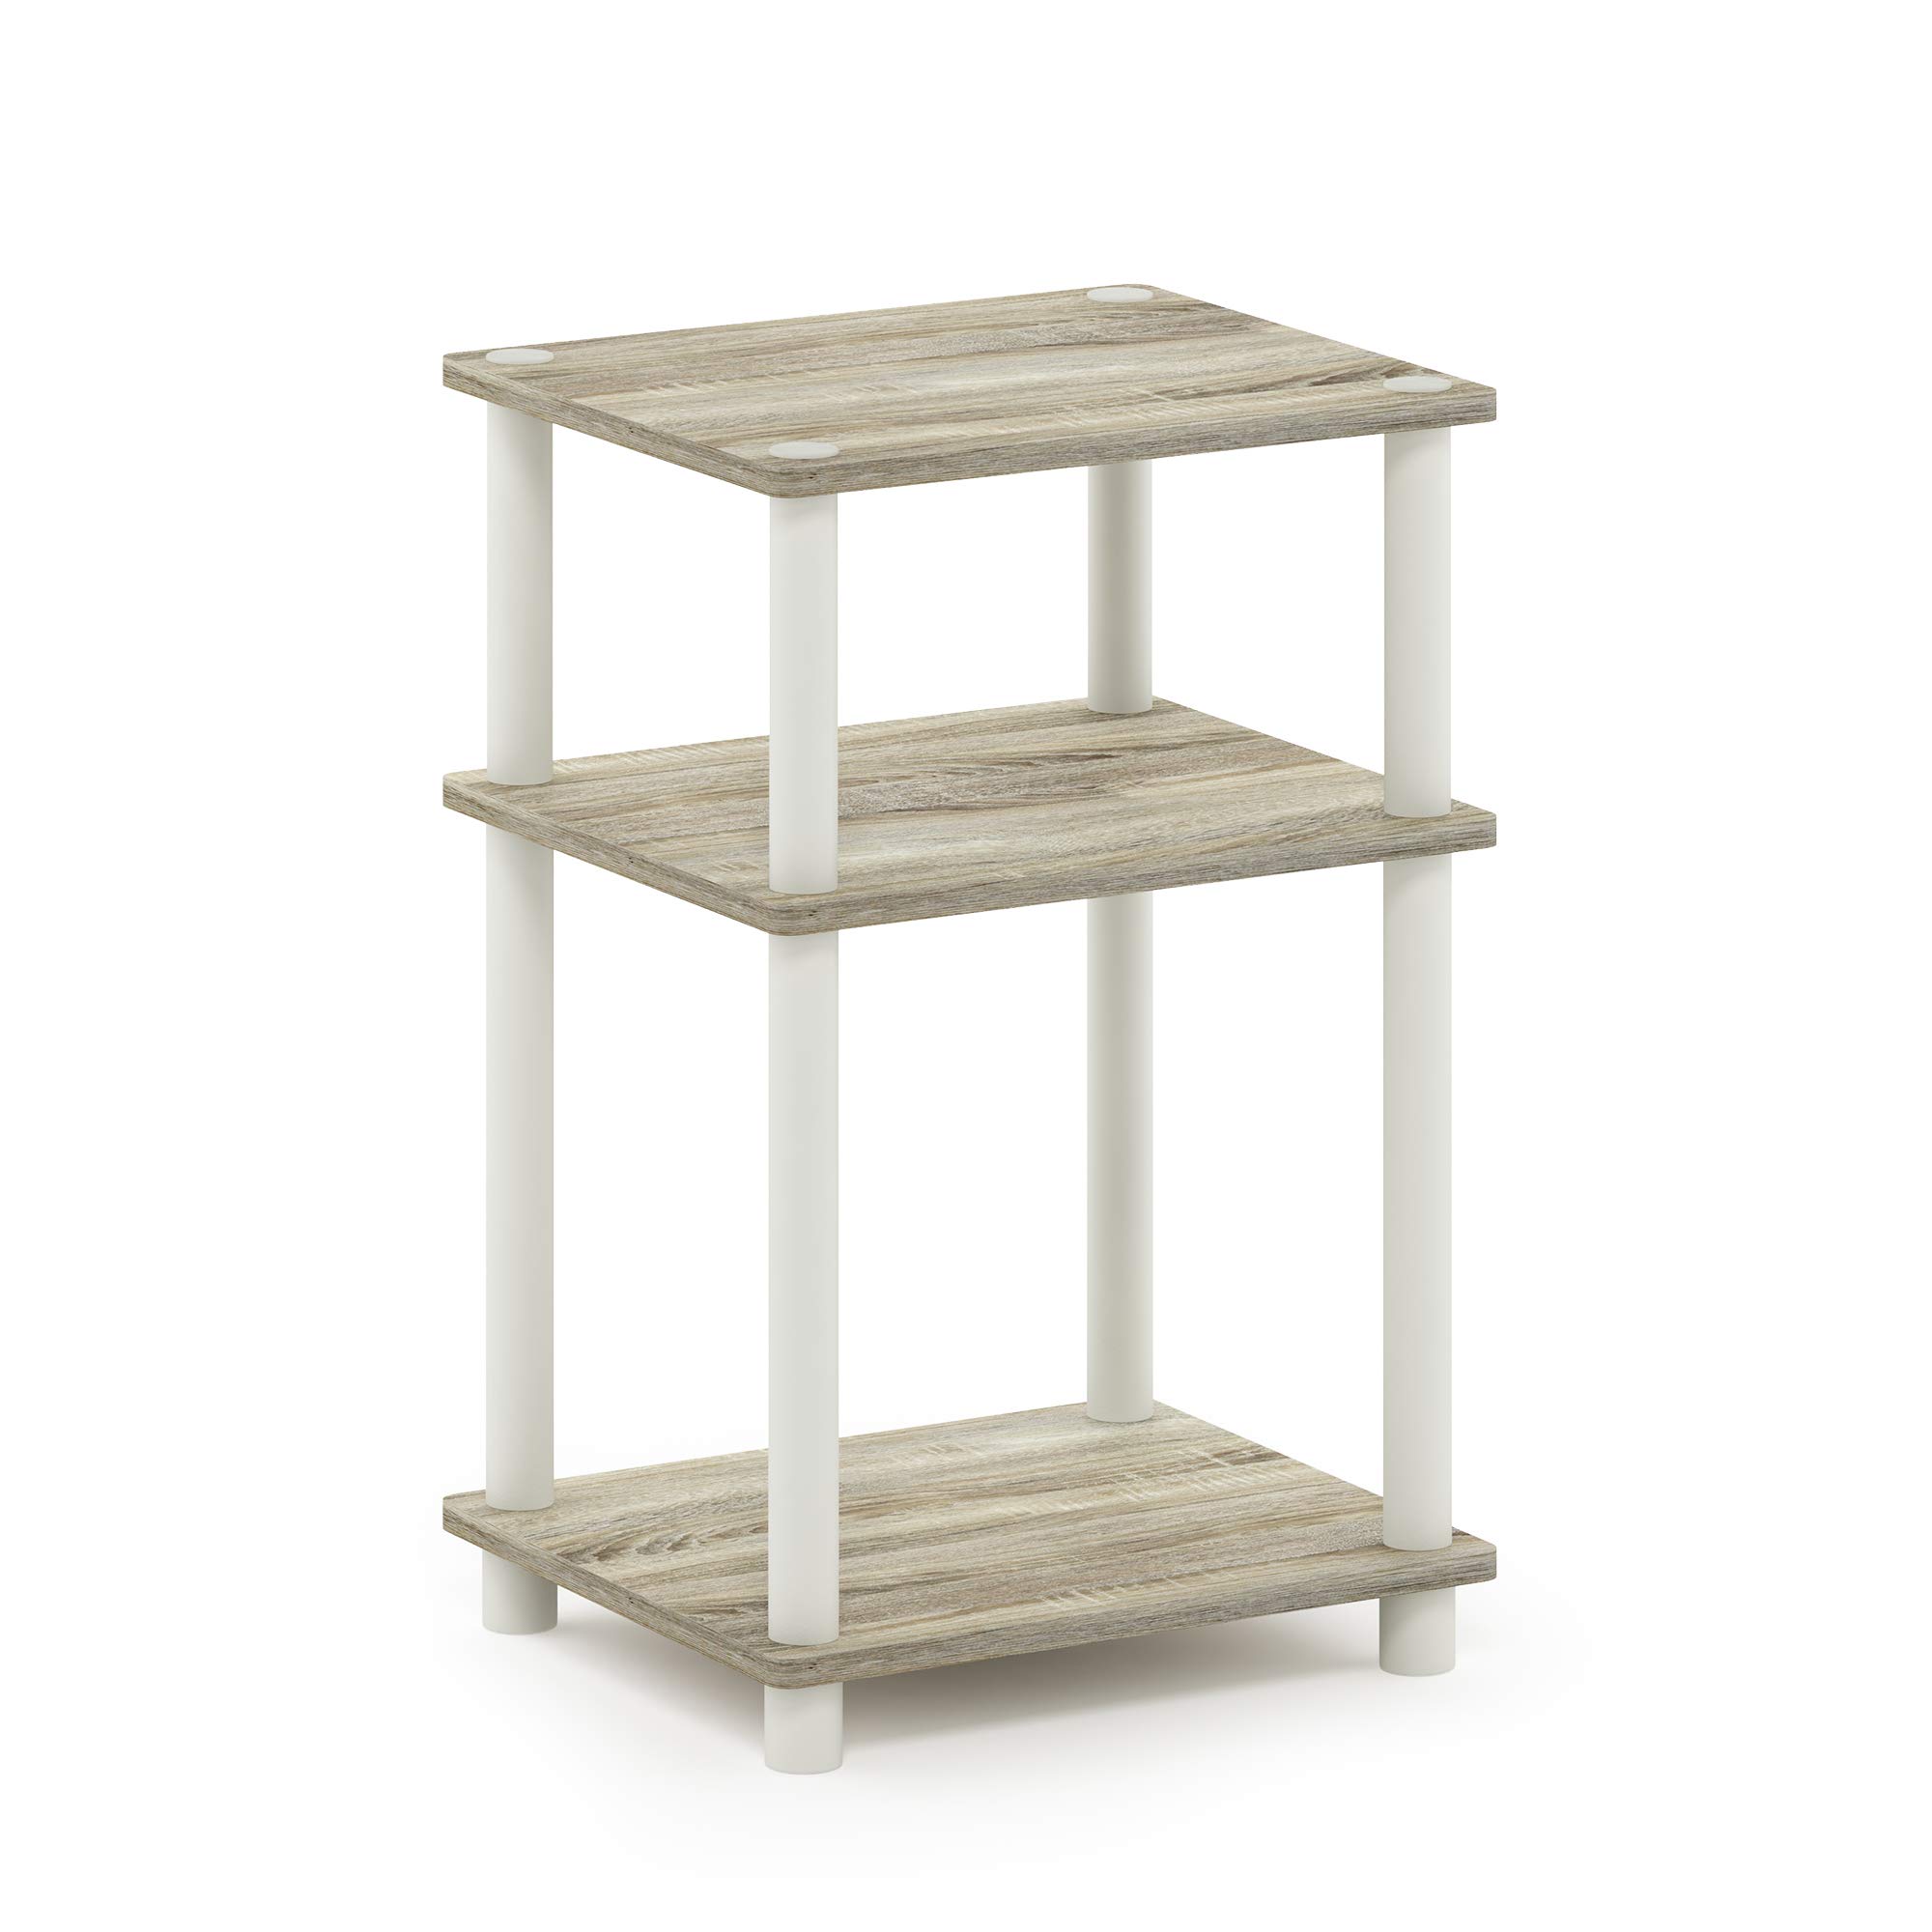 Furinno Just 3-Tier Turn-N-Tube End Table / Side Table / Night Stand / Bedside Table with Plastic Poles, 1-Pack, Sonoma Oak/White $8.25